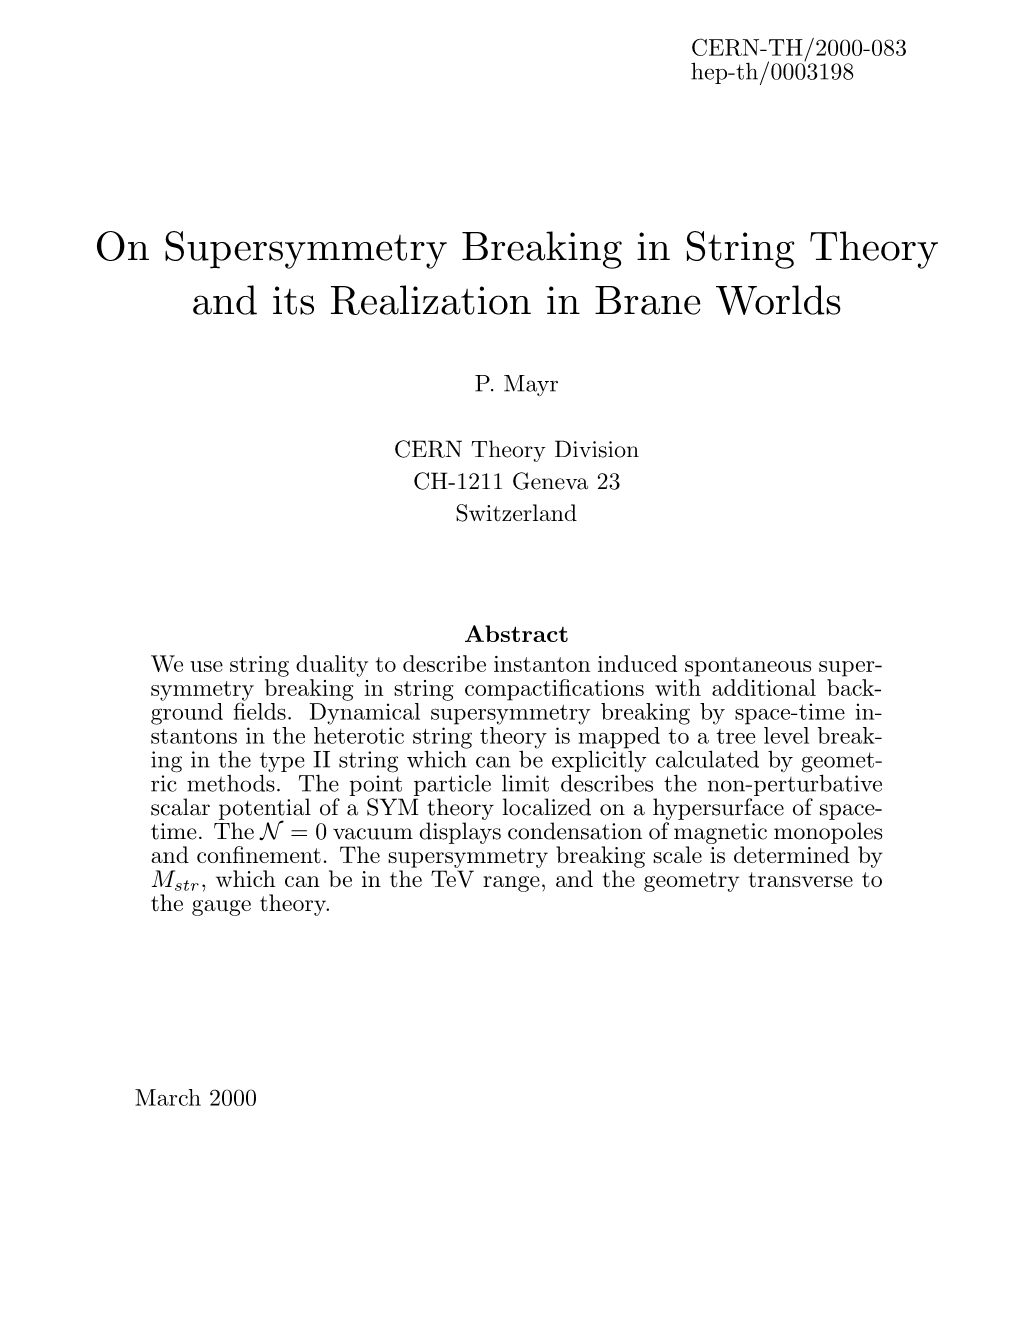 On Supersymmetry Breaking in String Theory and Its Realization in Brane Worlds